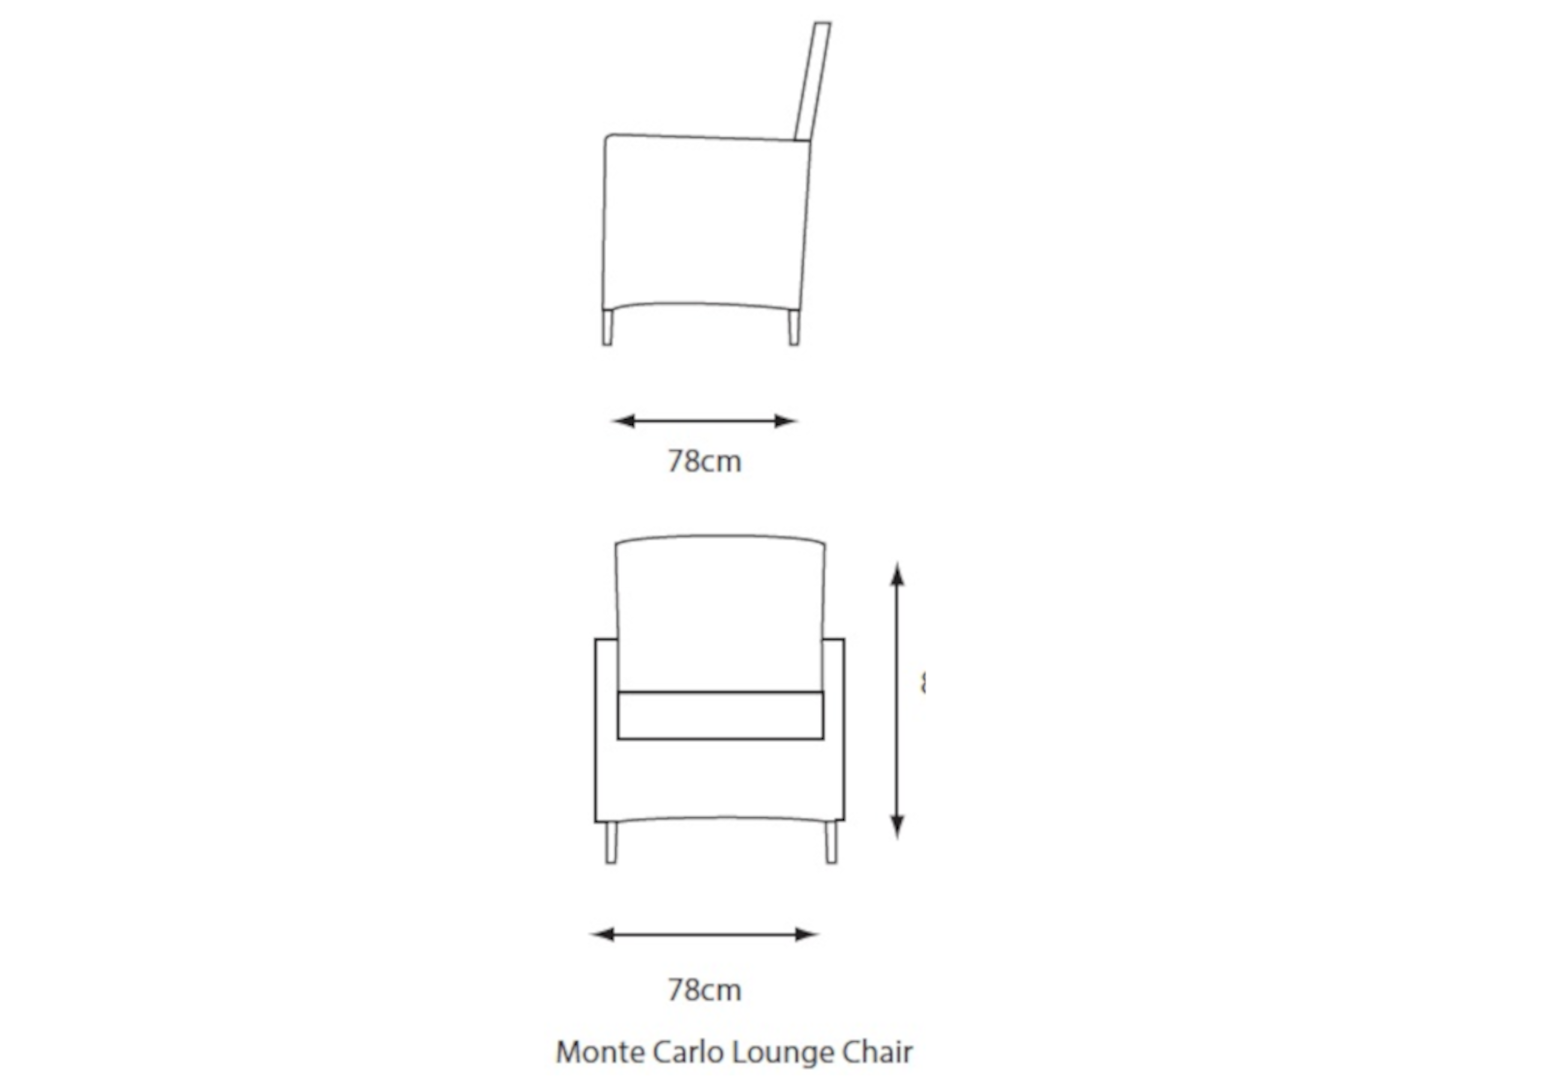 Lounge Chair - dimensions image